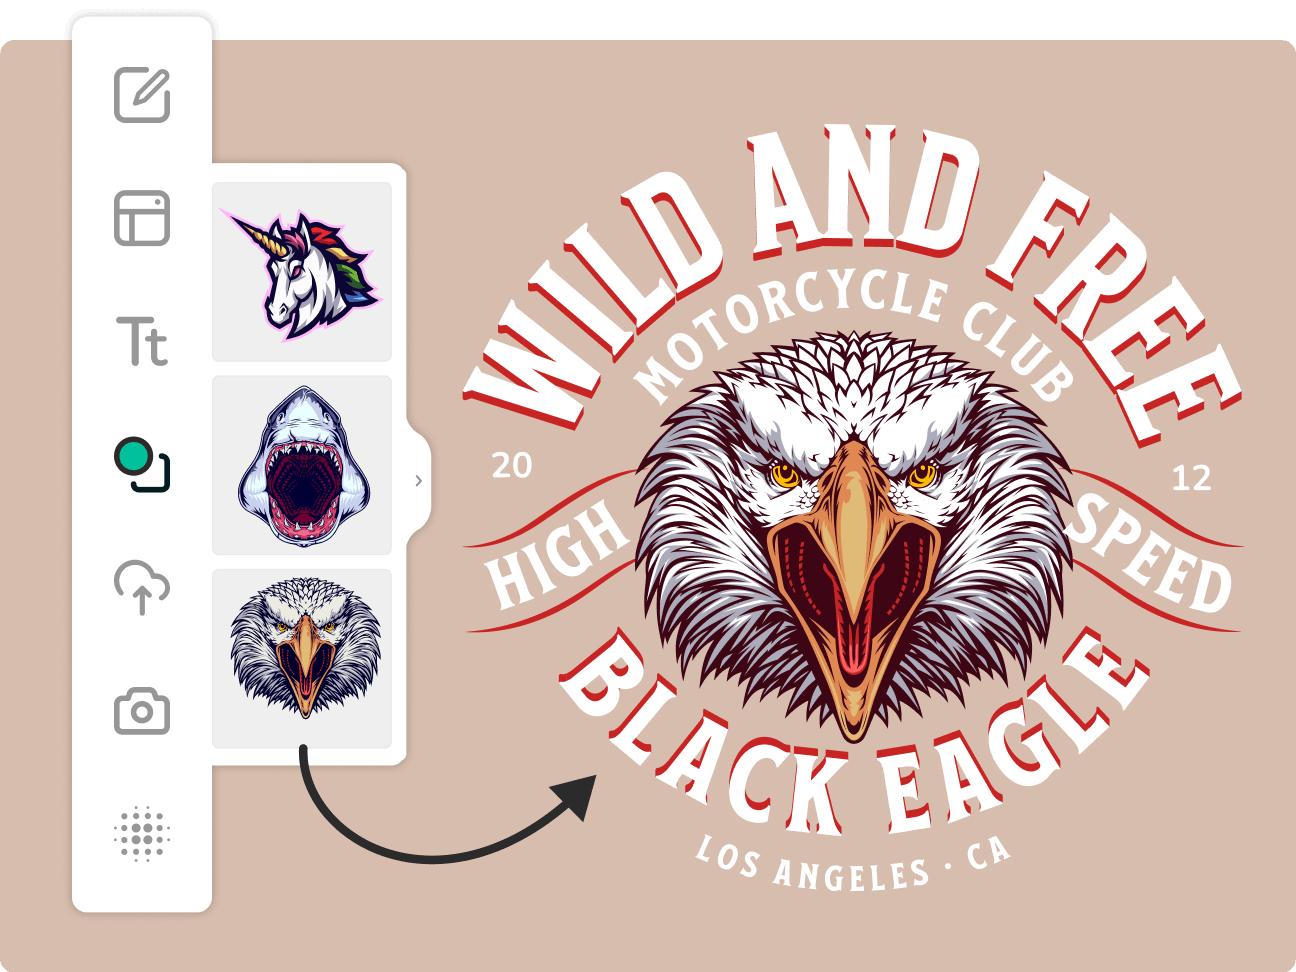 Using the drag'n'drop option in Kittl to insert an eagle illustration in motorcycle club'S logo design.